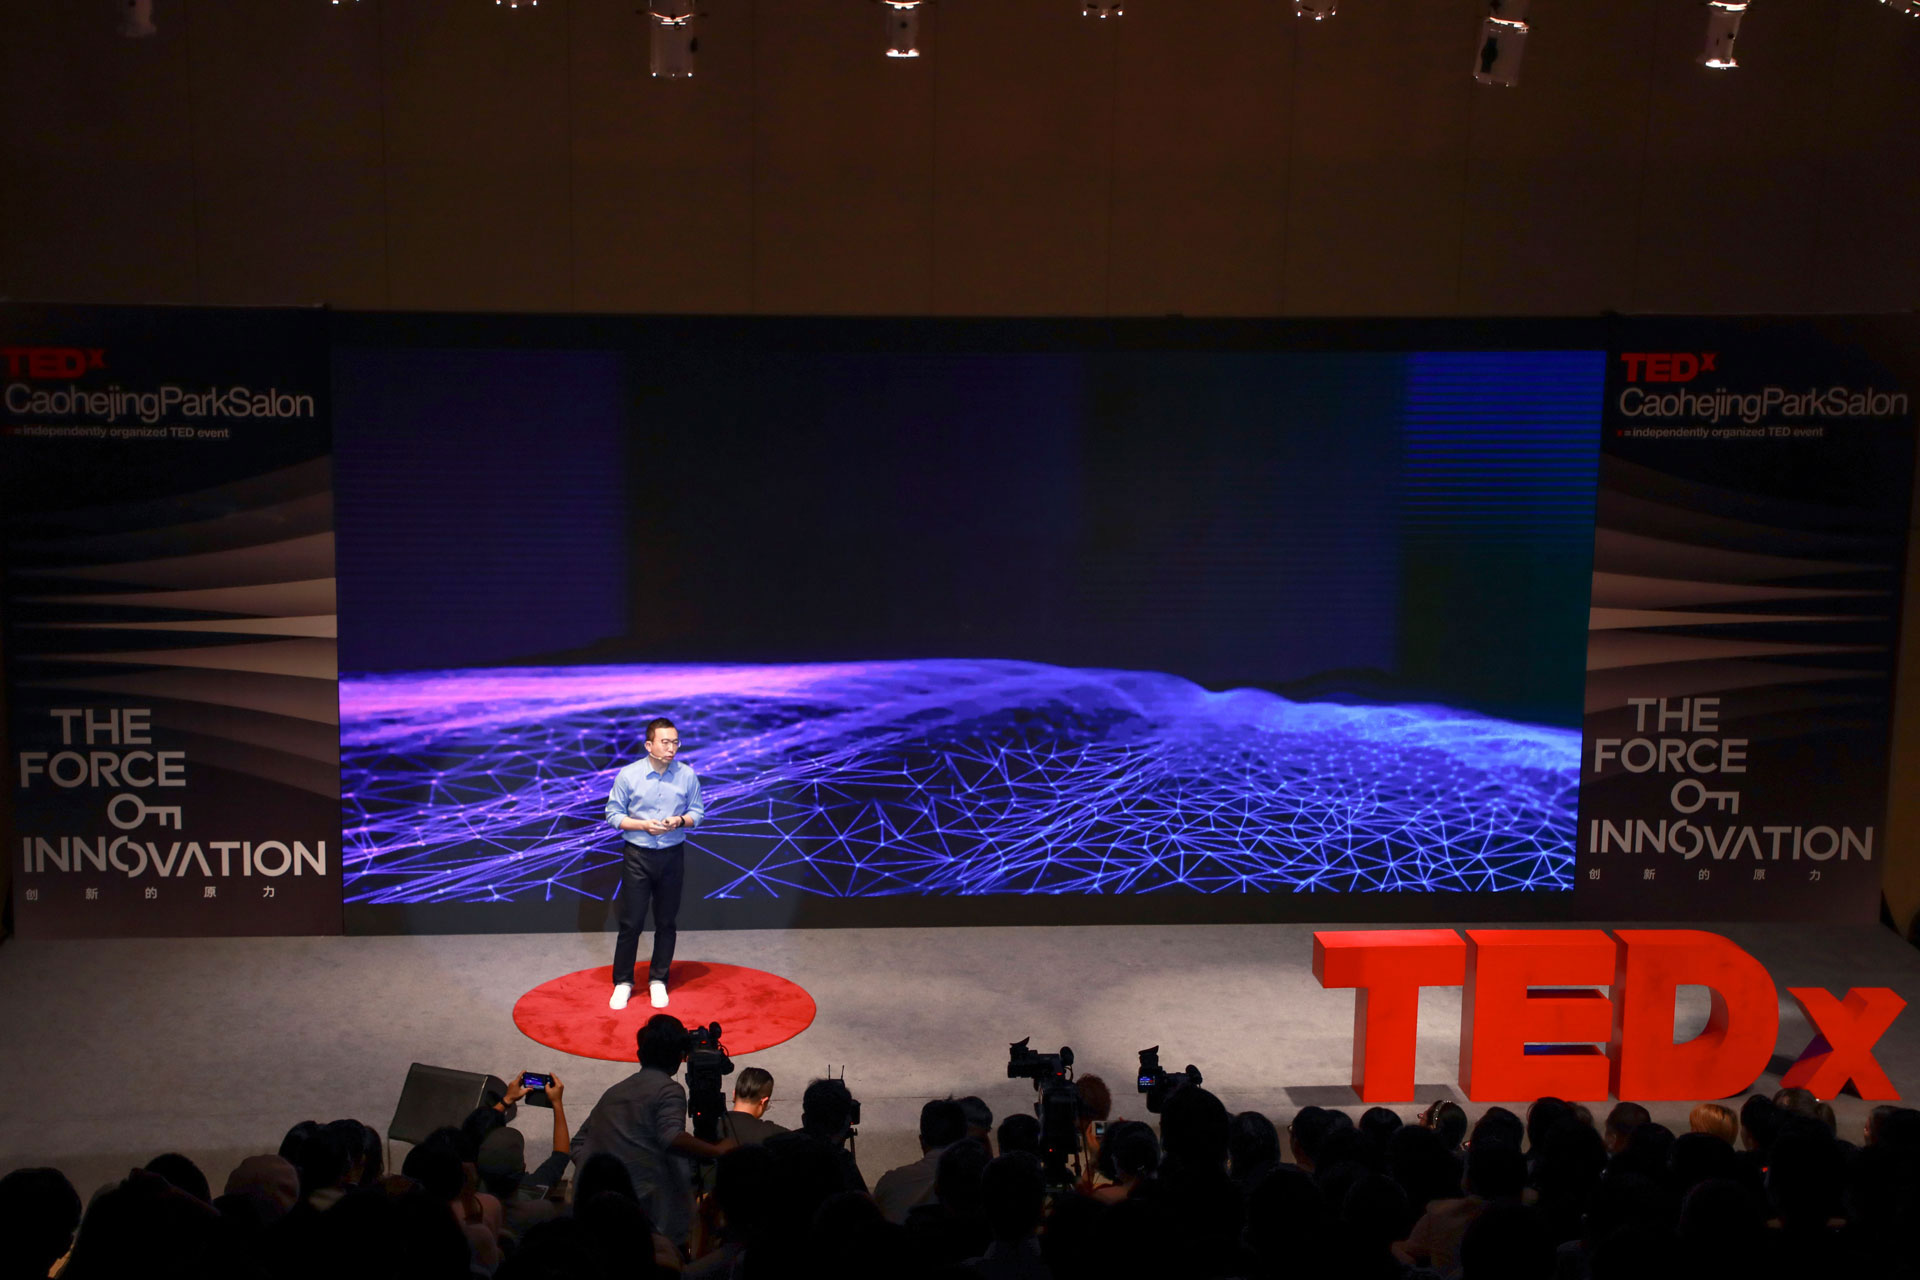 George Zhao, President of Honor talks innovations at TEDx Caohejing Park Salon